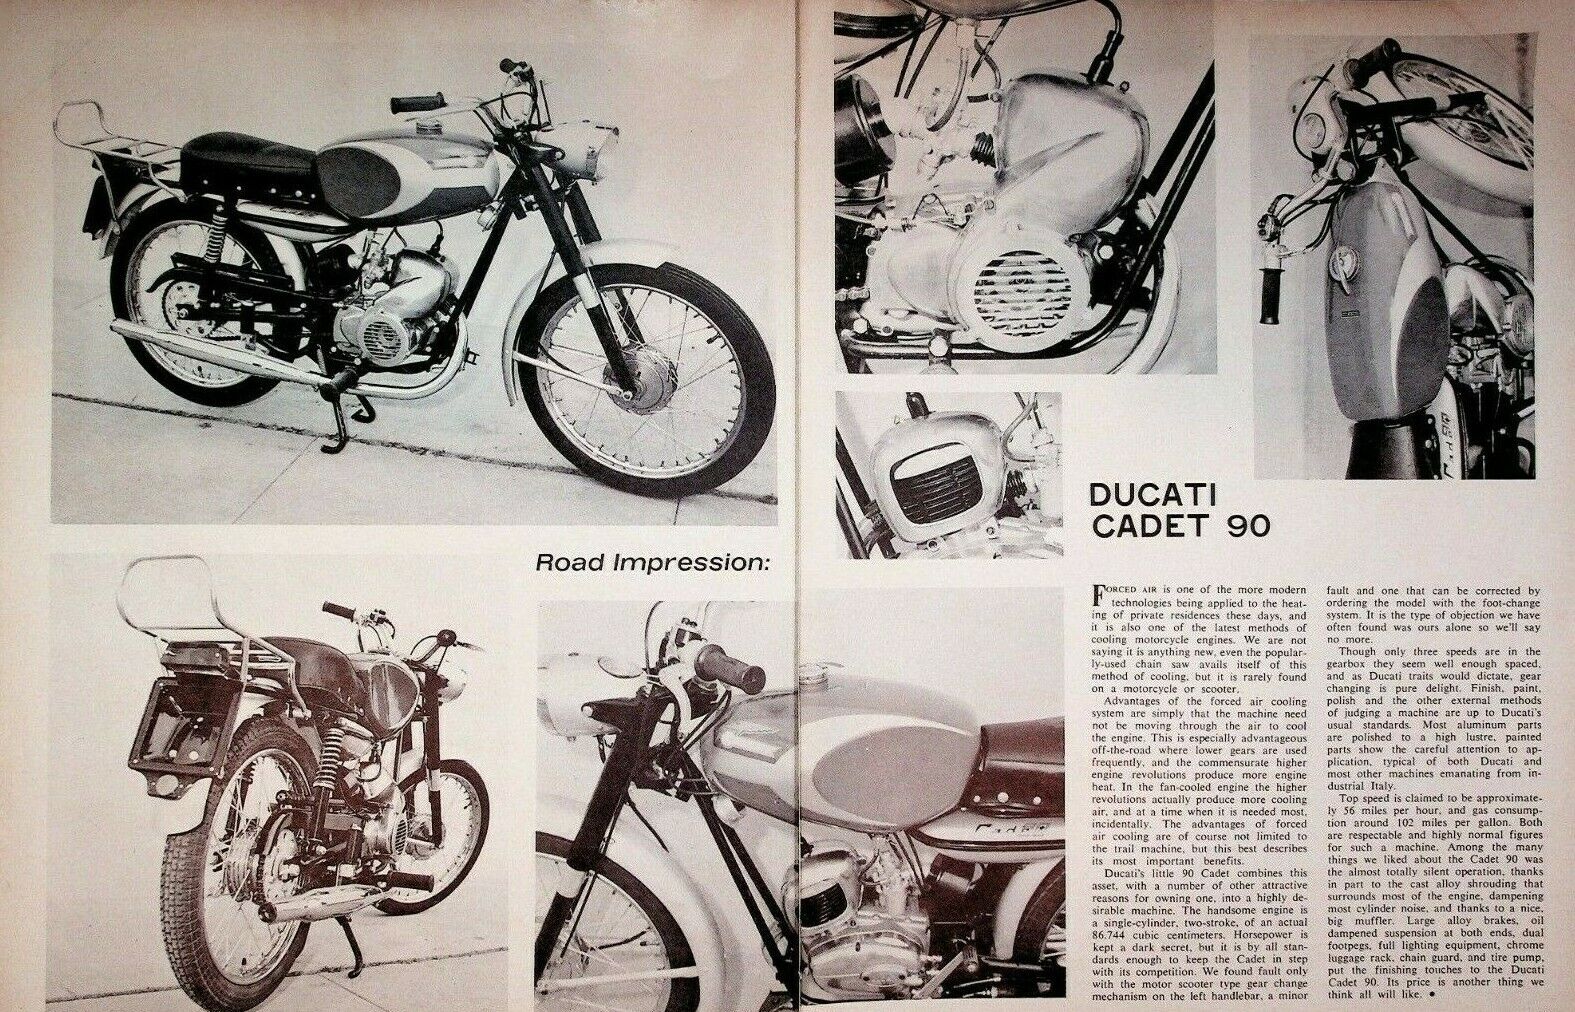 1965 Ducati Cadet 90 - 2-Page Vintage Motorcycle Article